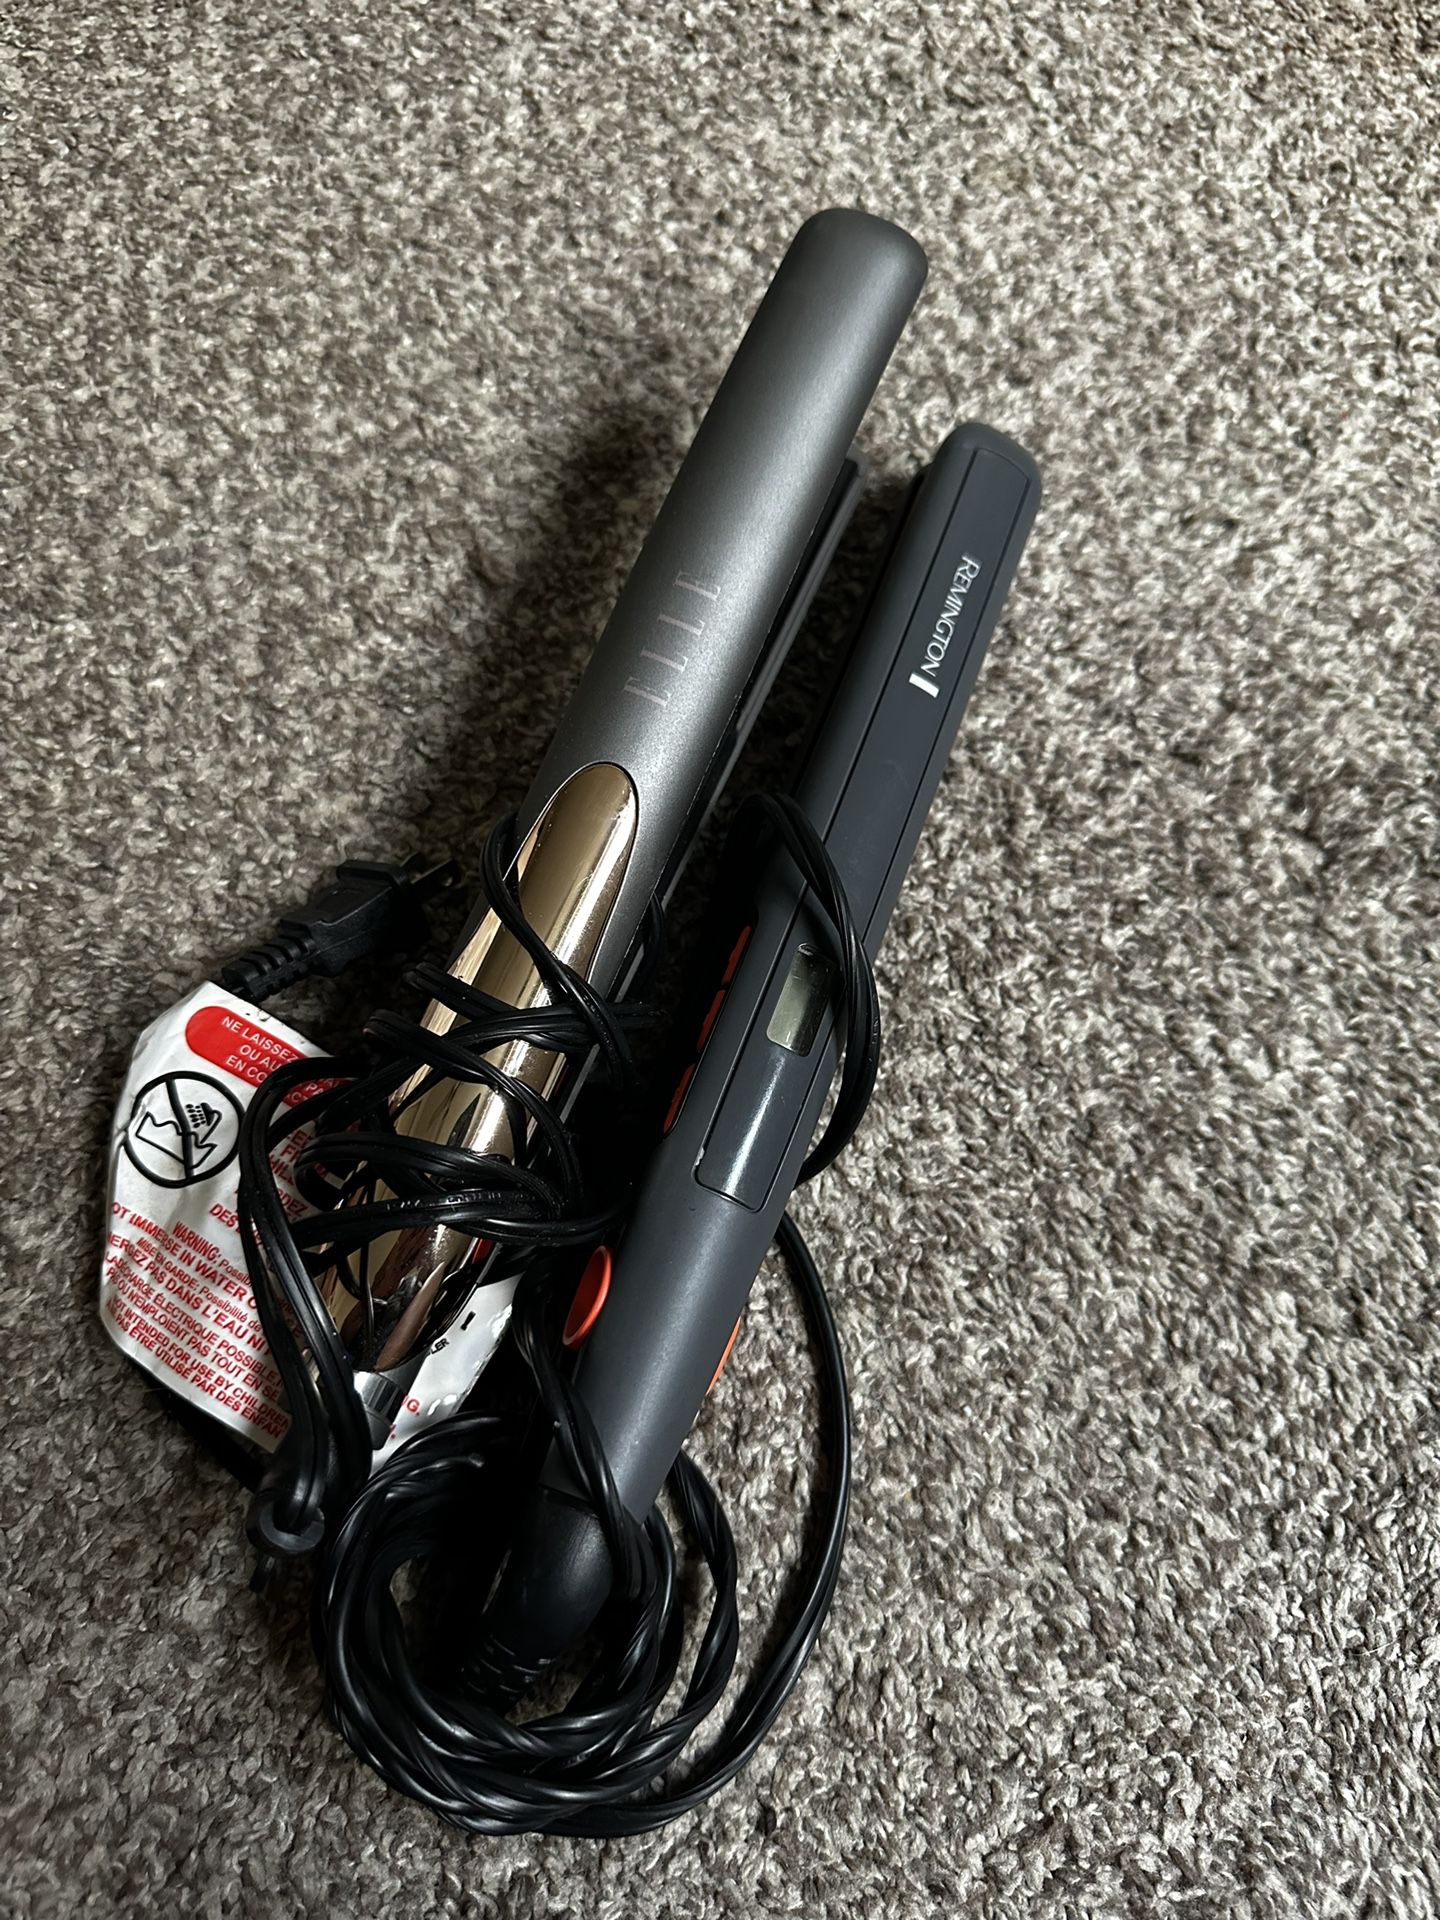 Straighteners Sold Separate 